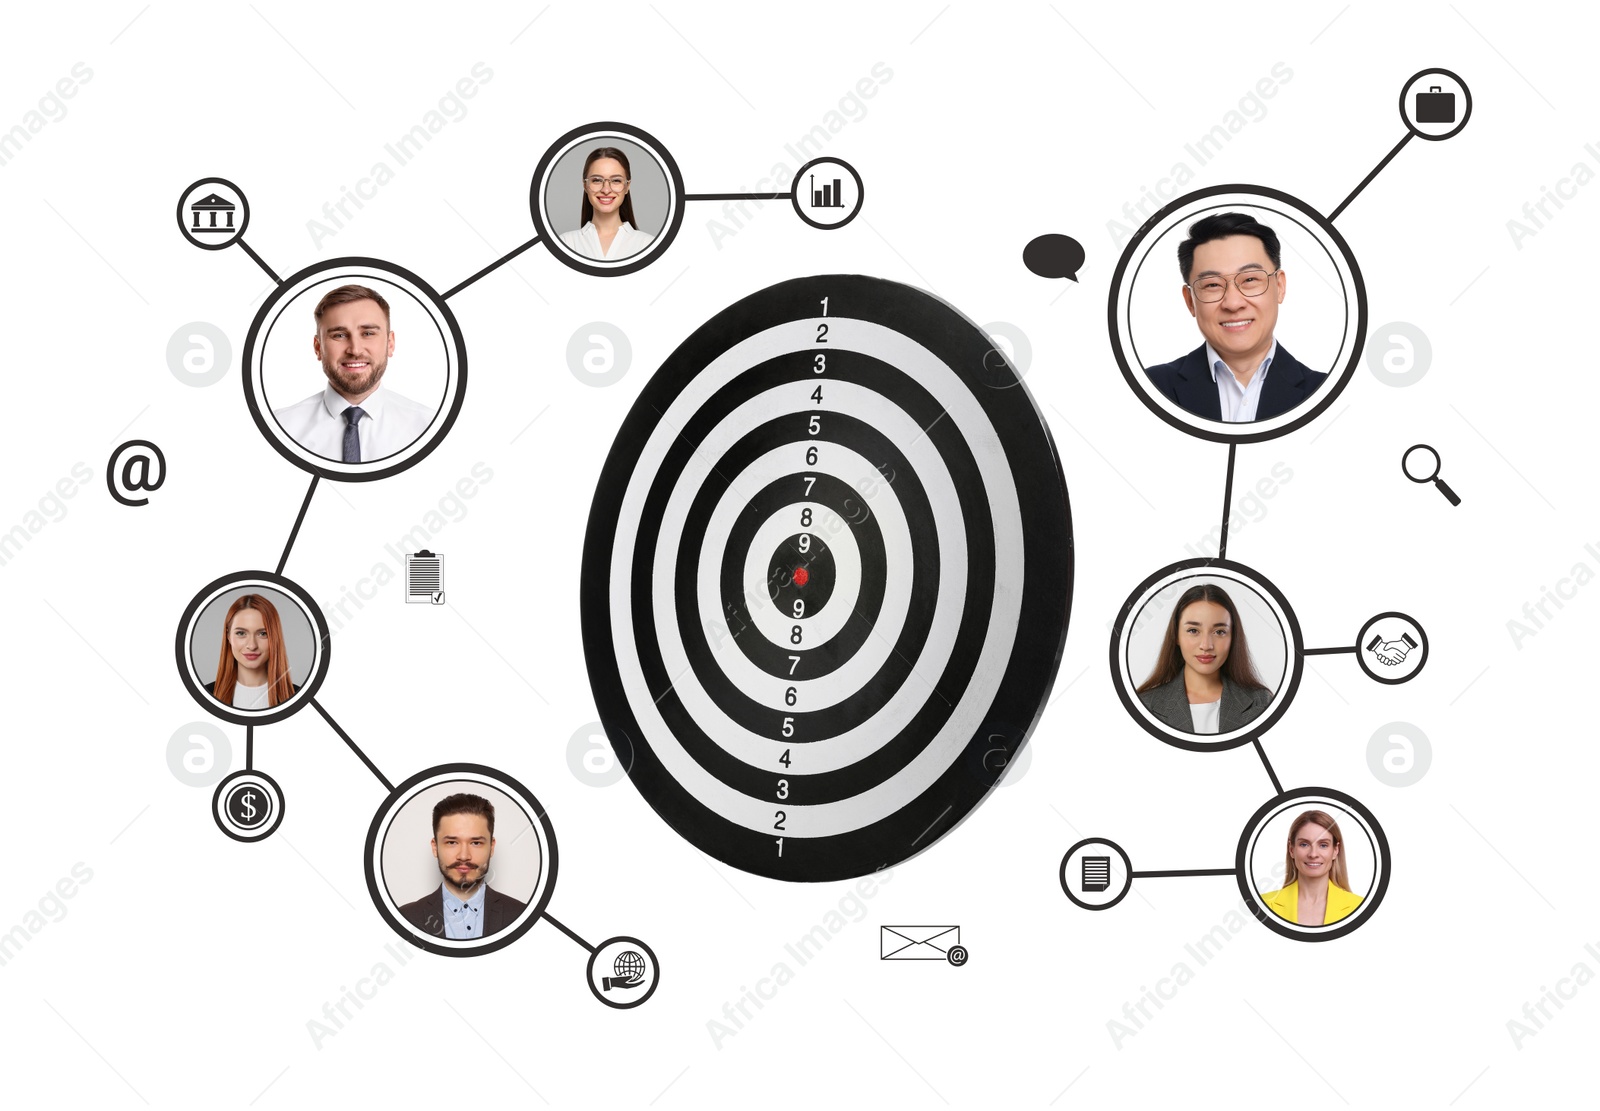 Image of Target audience. Dartboard surrounded by photos of potential clients linked together and icons on white background